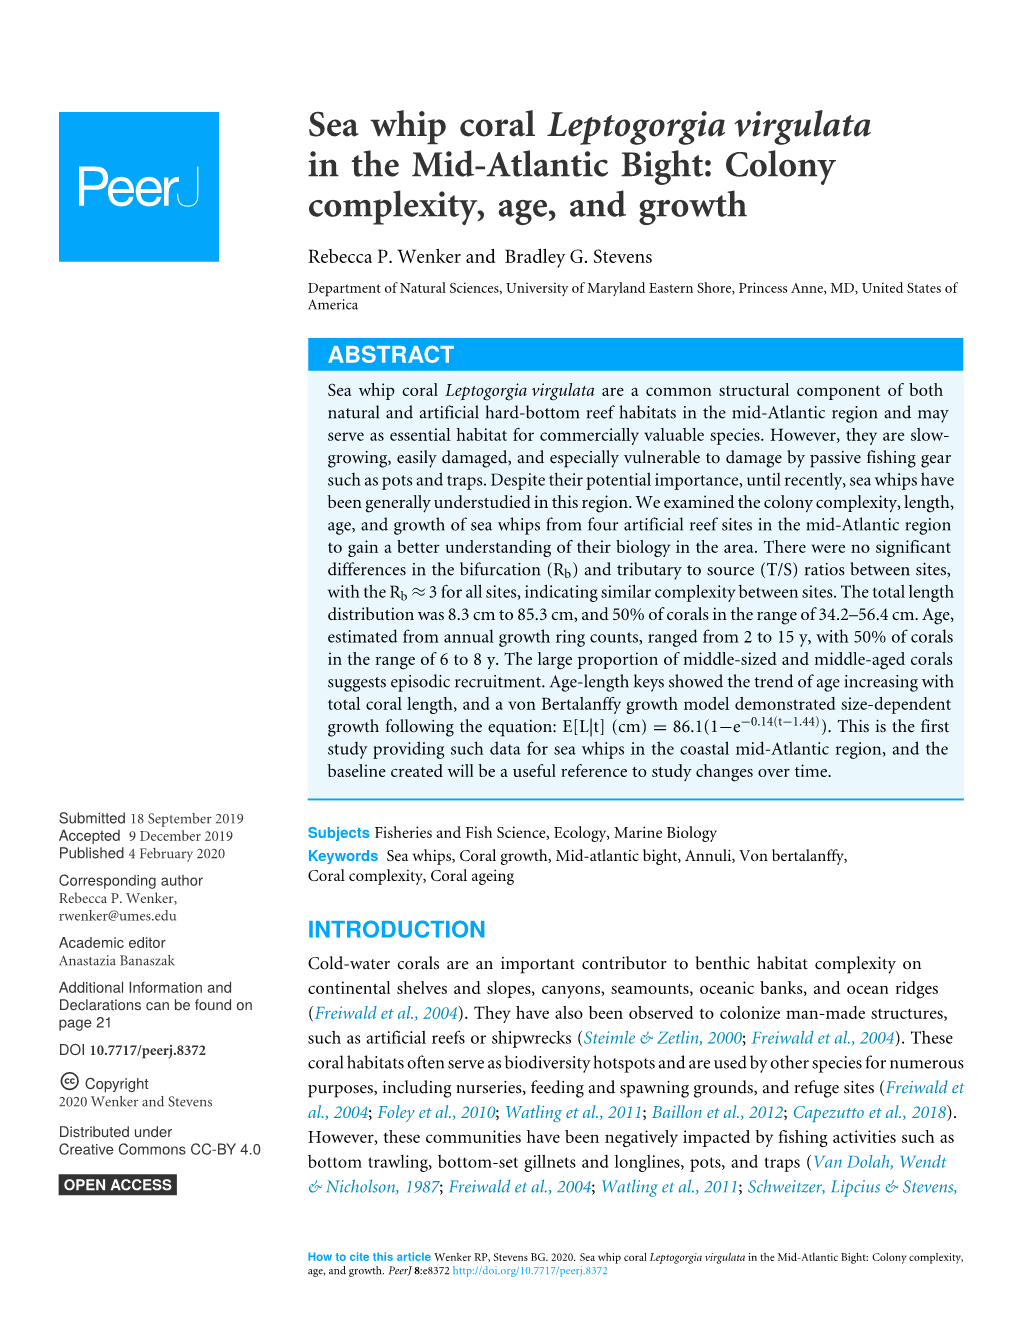 Sea Whip Coral Leptogorgia Virgulata in the Mid-Atlantic Bight: Colony Complexity, Age, and Growth